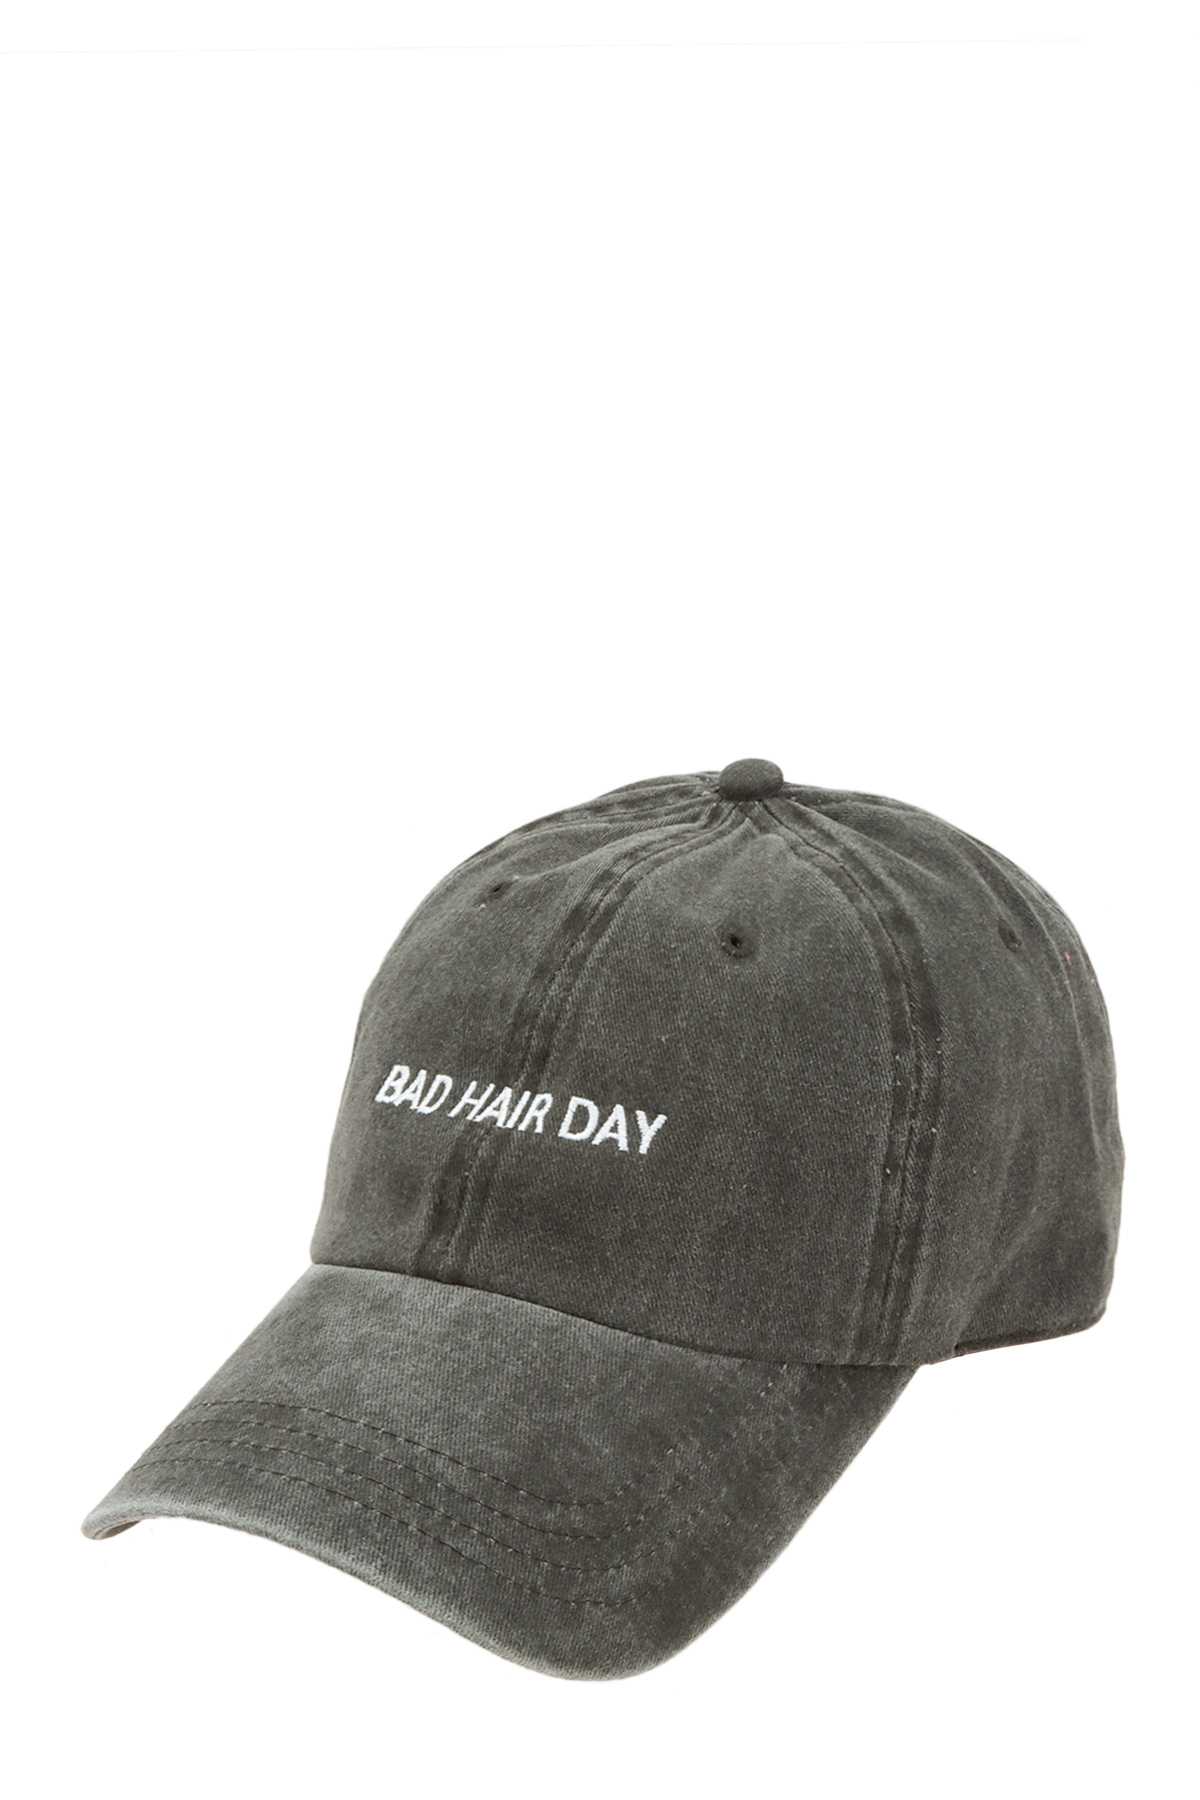 BAD HAIR DAY EMBROIDERED PIGMENT BASEBALL CAP